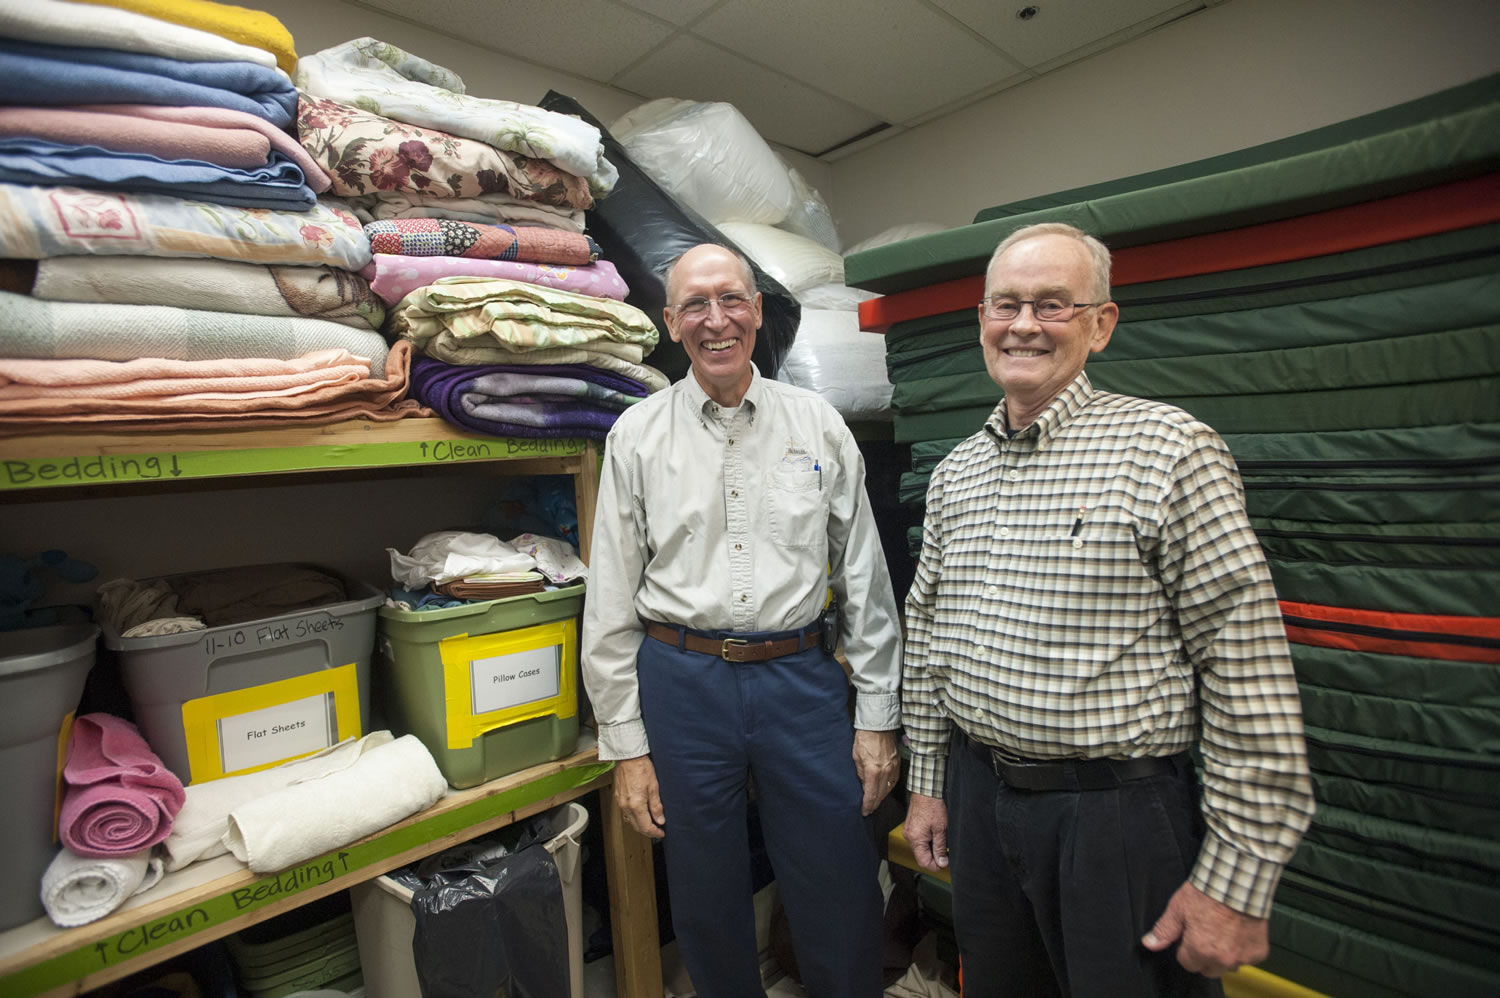 Pastor Jim Stender (L) and volunteer Denny Scott show a supply of bedding to be used in housing the needy this winter at Saint Andrew Lutheran Church in Vancouver Thursday September 16, 2015. The faith community aims to impact the affordable housing crisis.